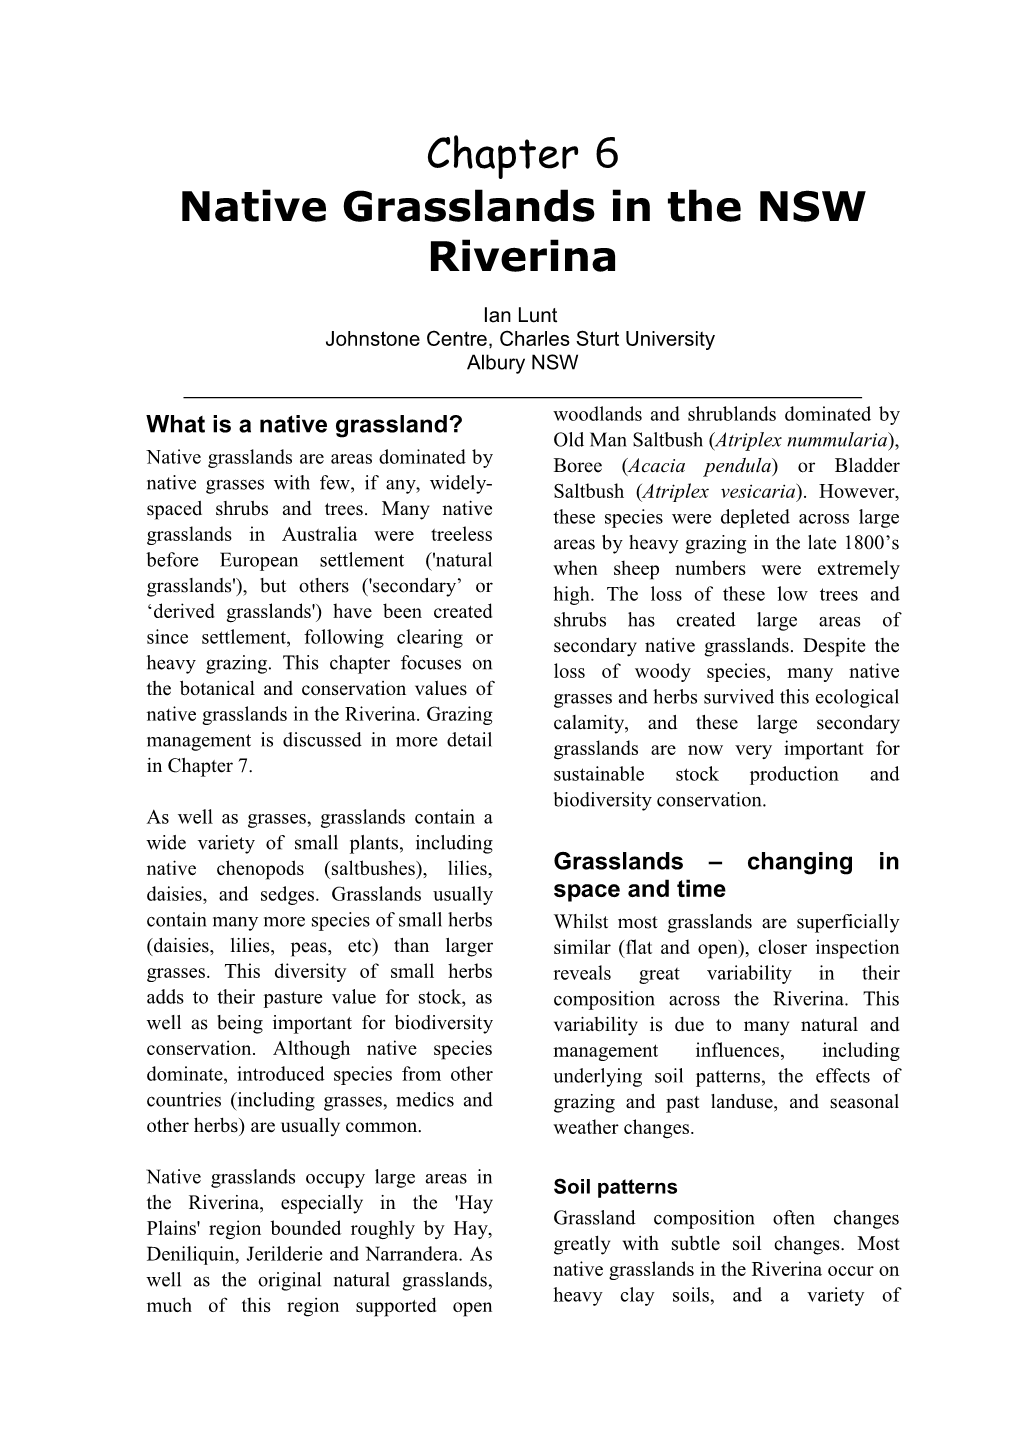 Chapter 6 Native Grasslands in the NSW Riverina